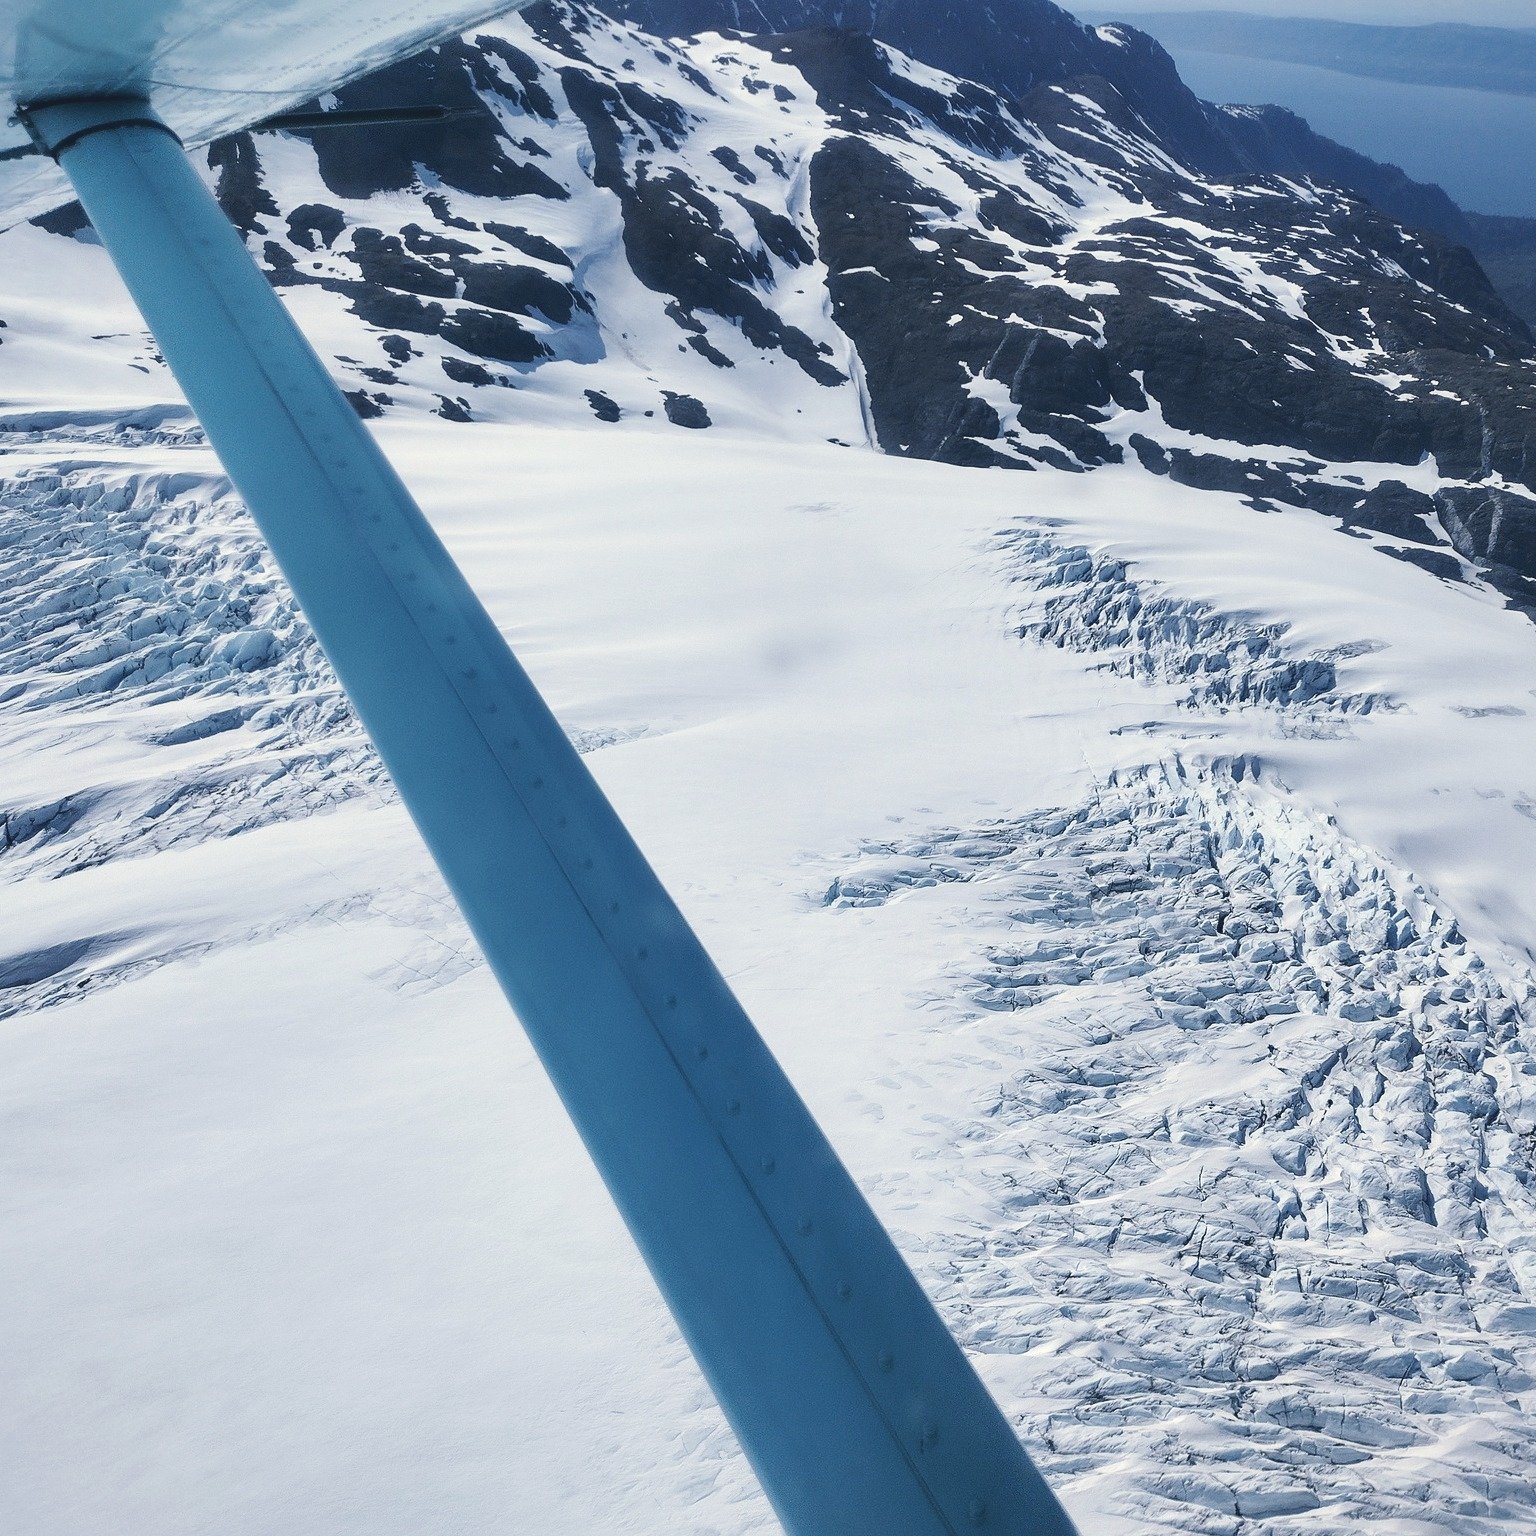 Don't miss out on our Grewingk Glacier or Kachemak Bay flightseeing tours!  Tours are available daily, so give us a call to get on the schedule.  Each tour offers an educational narrated flight and amazing views!

Learn more at https://www.belugaair.